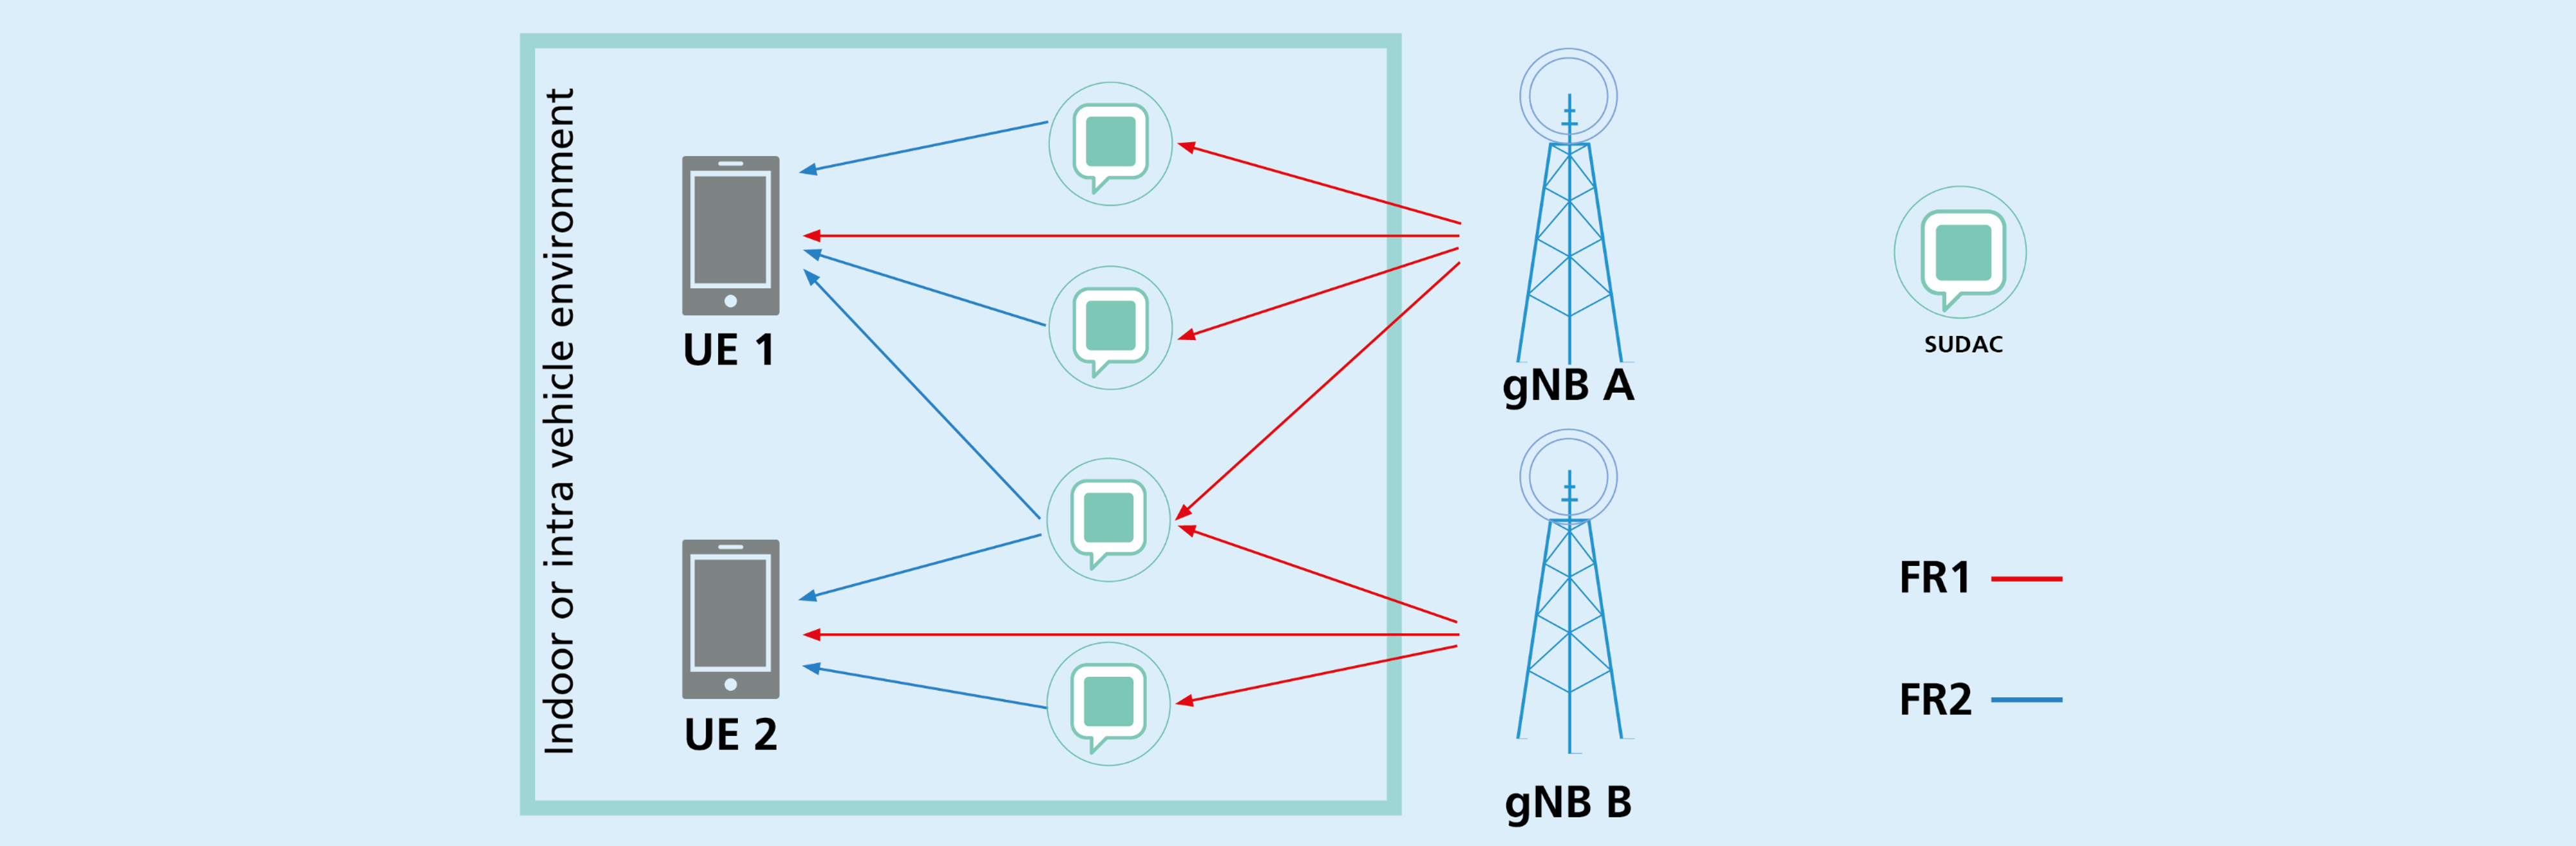 Basic concept of SUDAS for mobile indoor communications